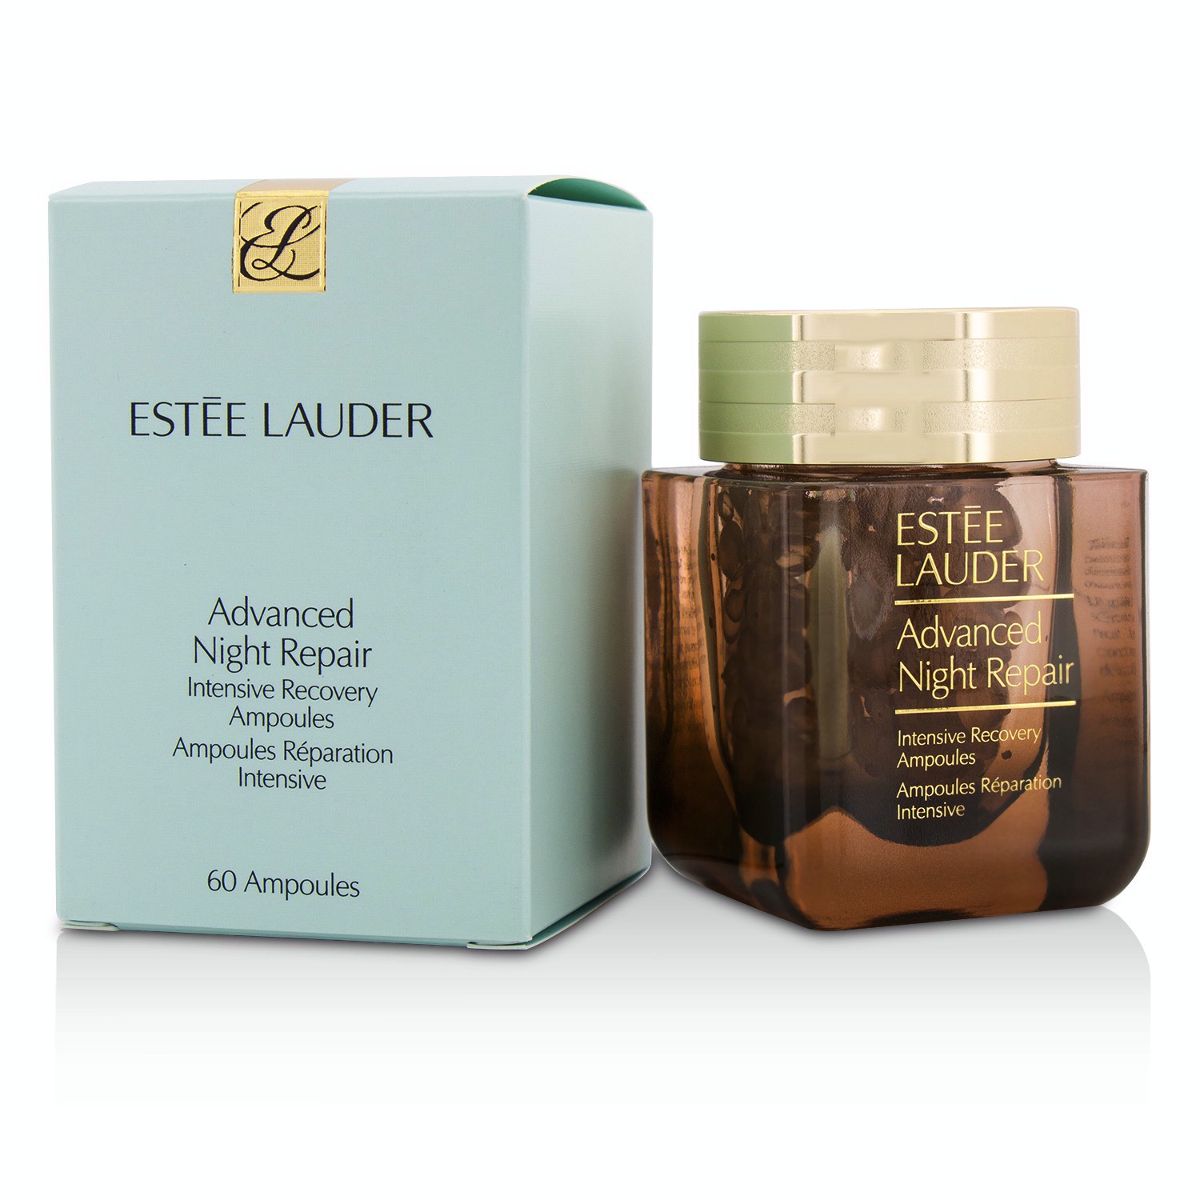 Advanced Night Repair Intensive Recovery Ampoules Estee Lauder Image